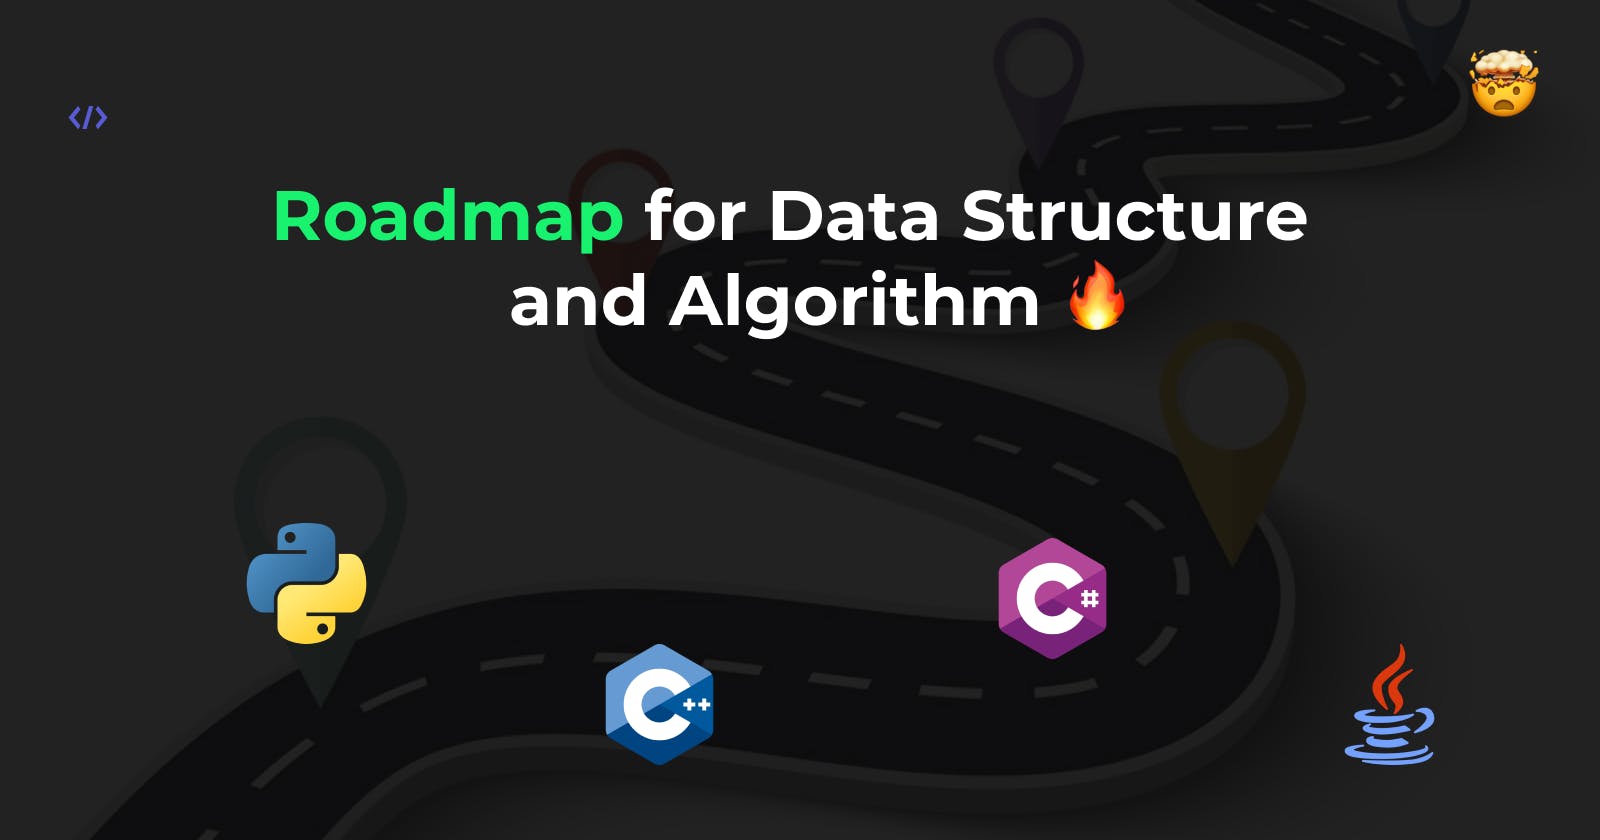 How to get started with Data Structure and Algorithm(DSA)